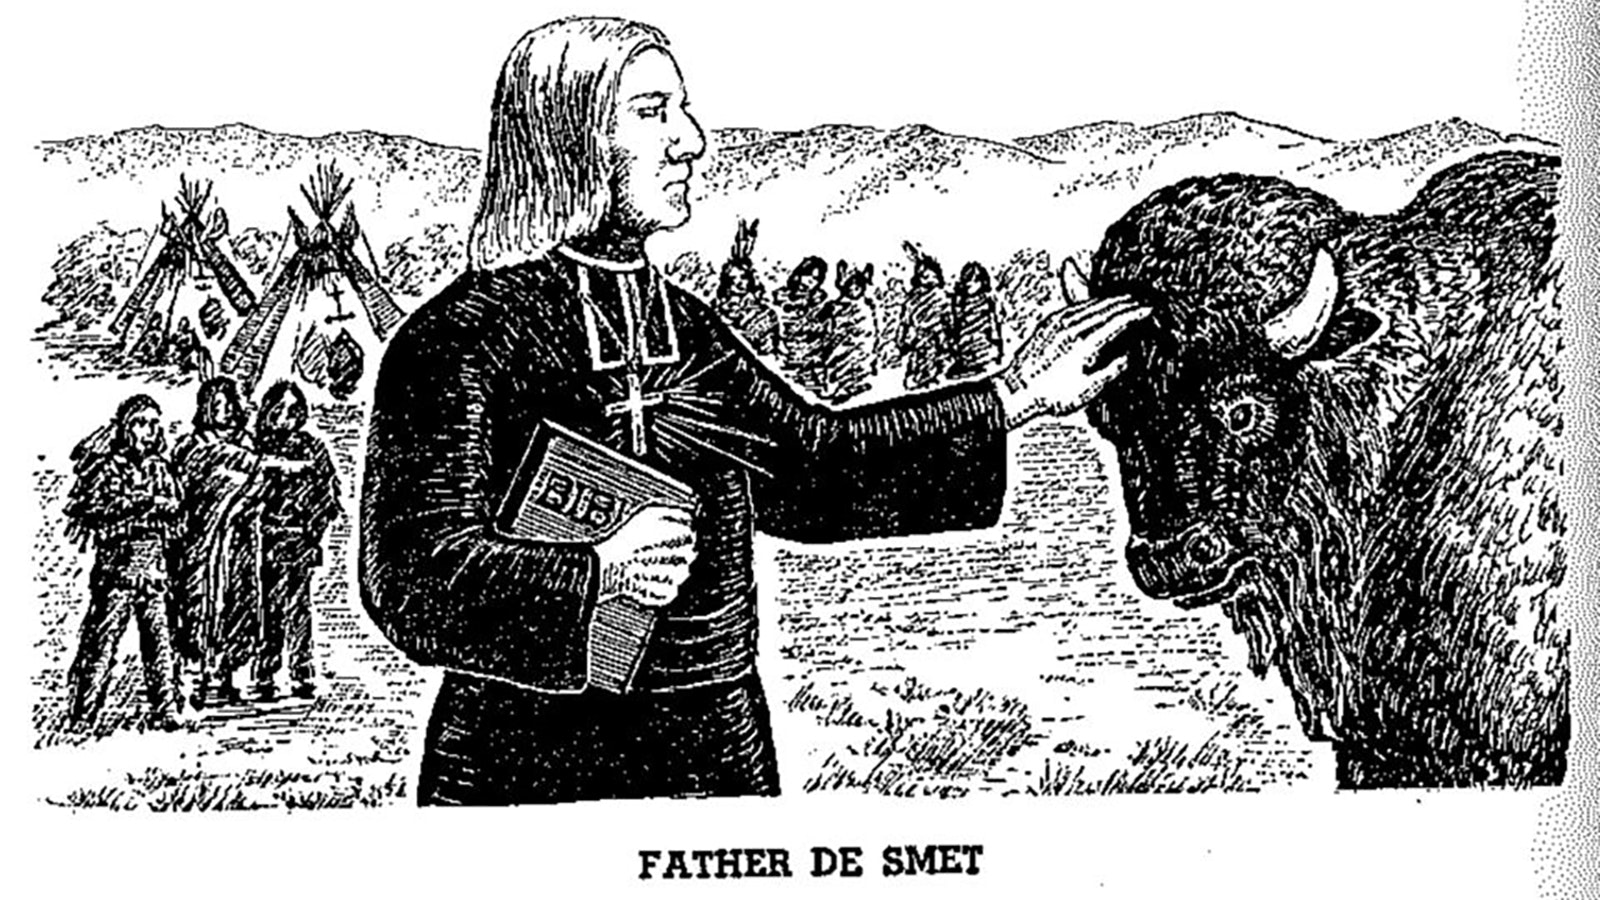 An illustration of Fr. Pierre-Jean De Smet visiting American Indians on his travels throughout the West.